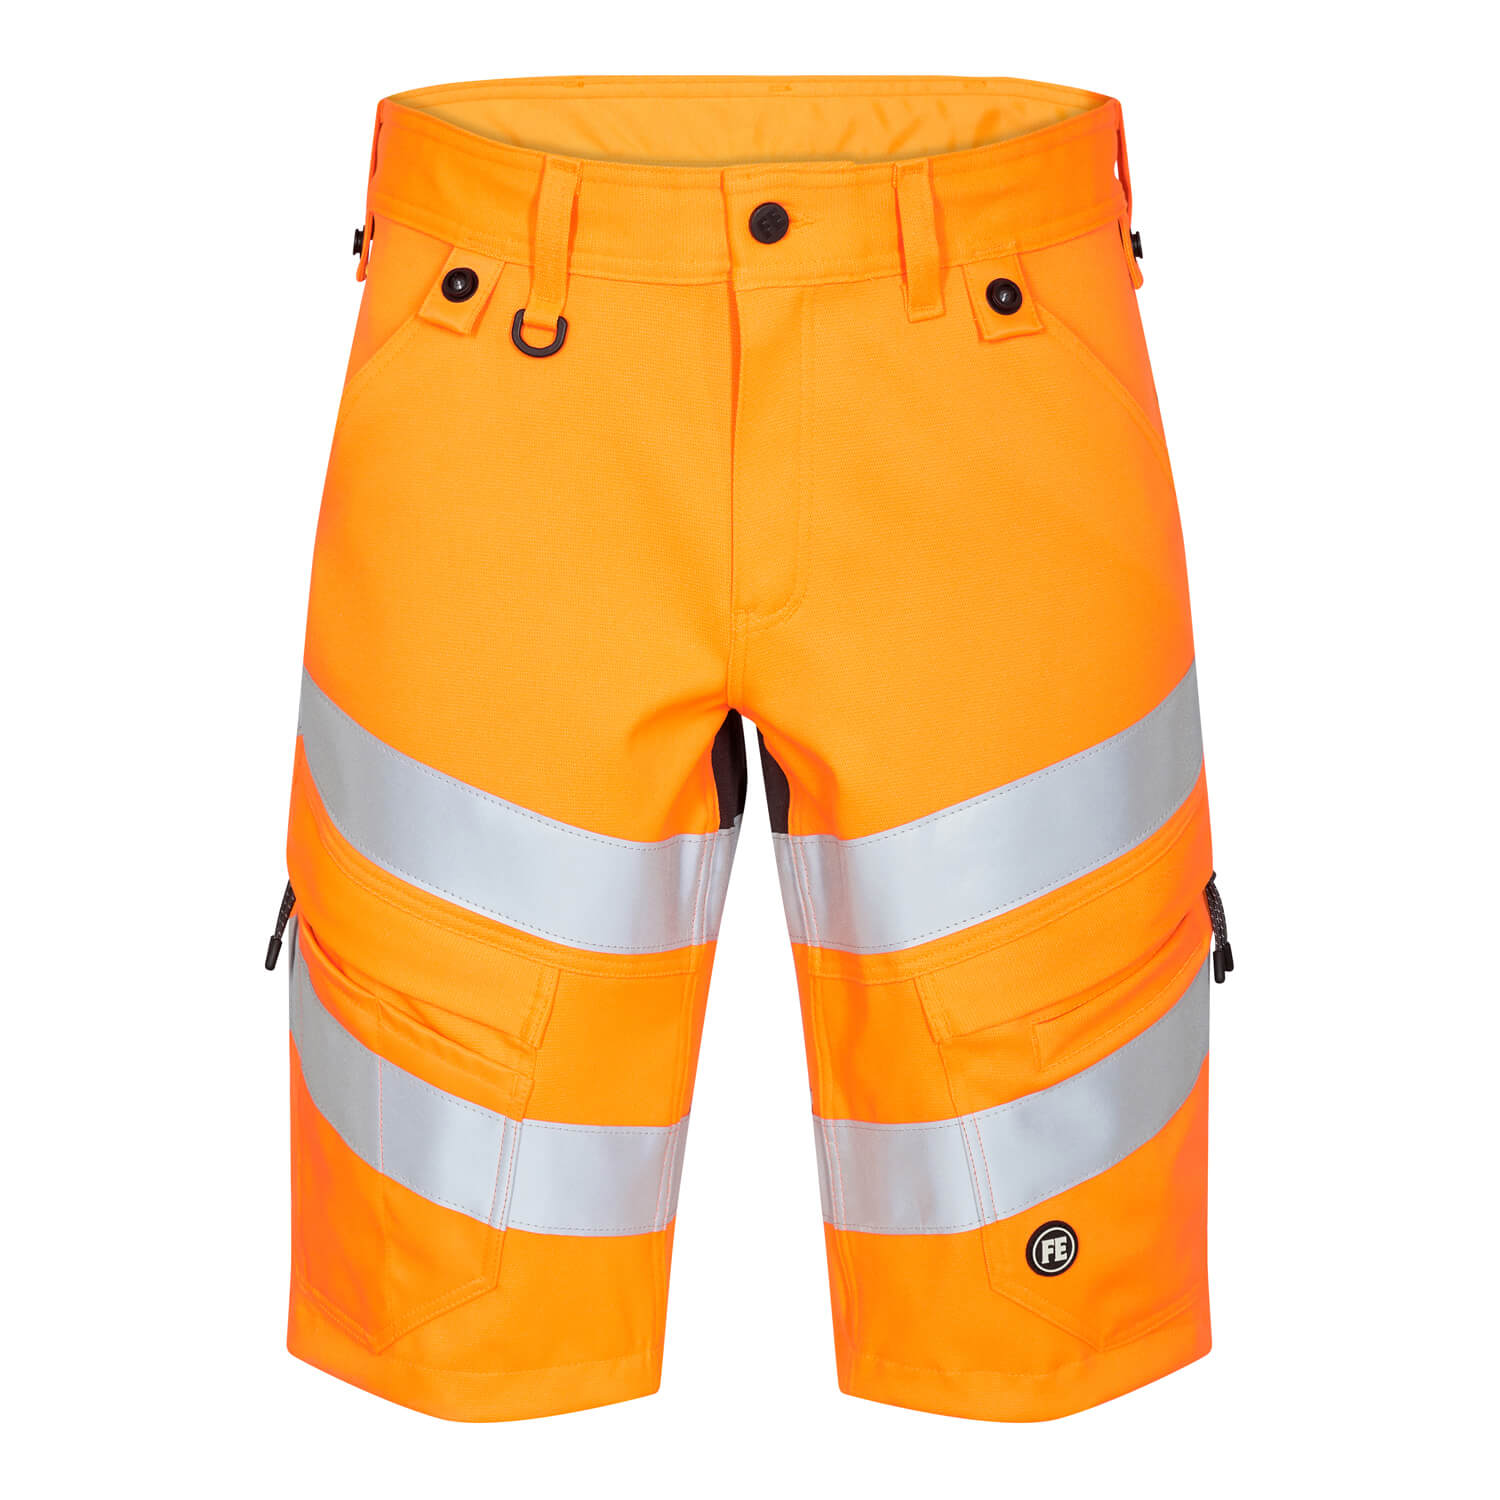 Safety Shorts & Safety Knickers